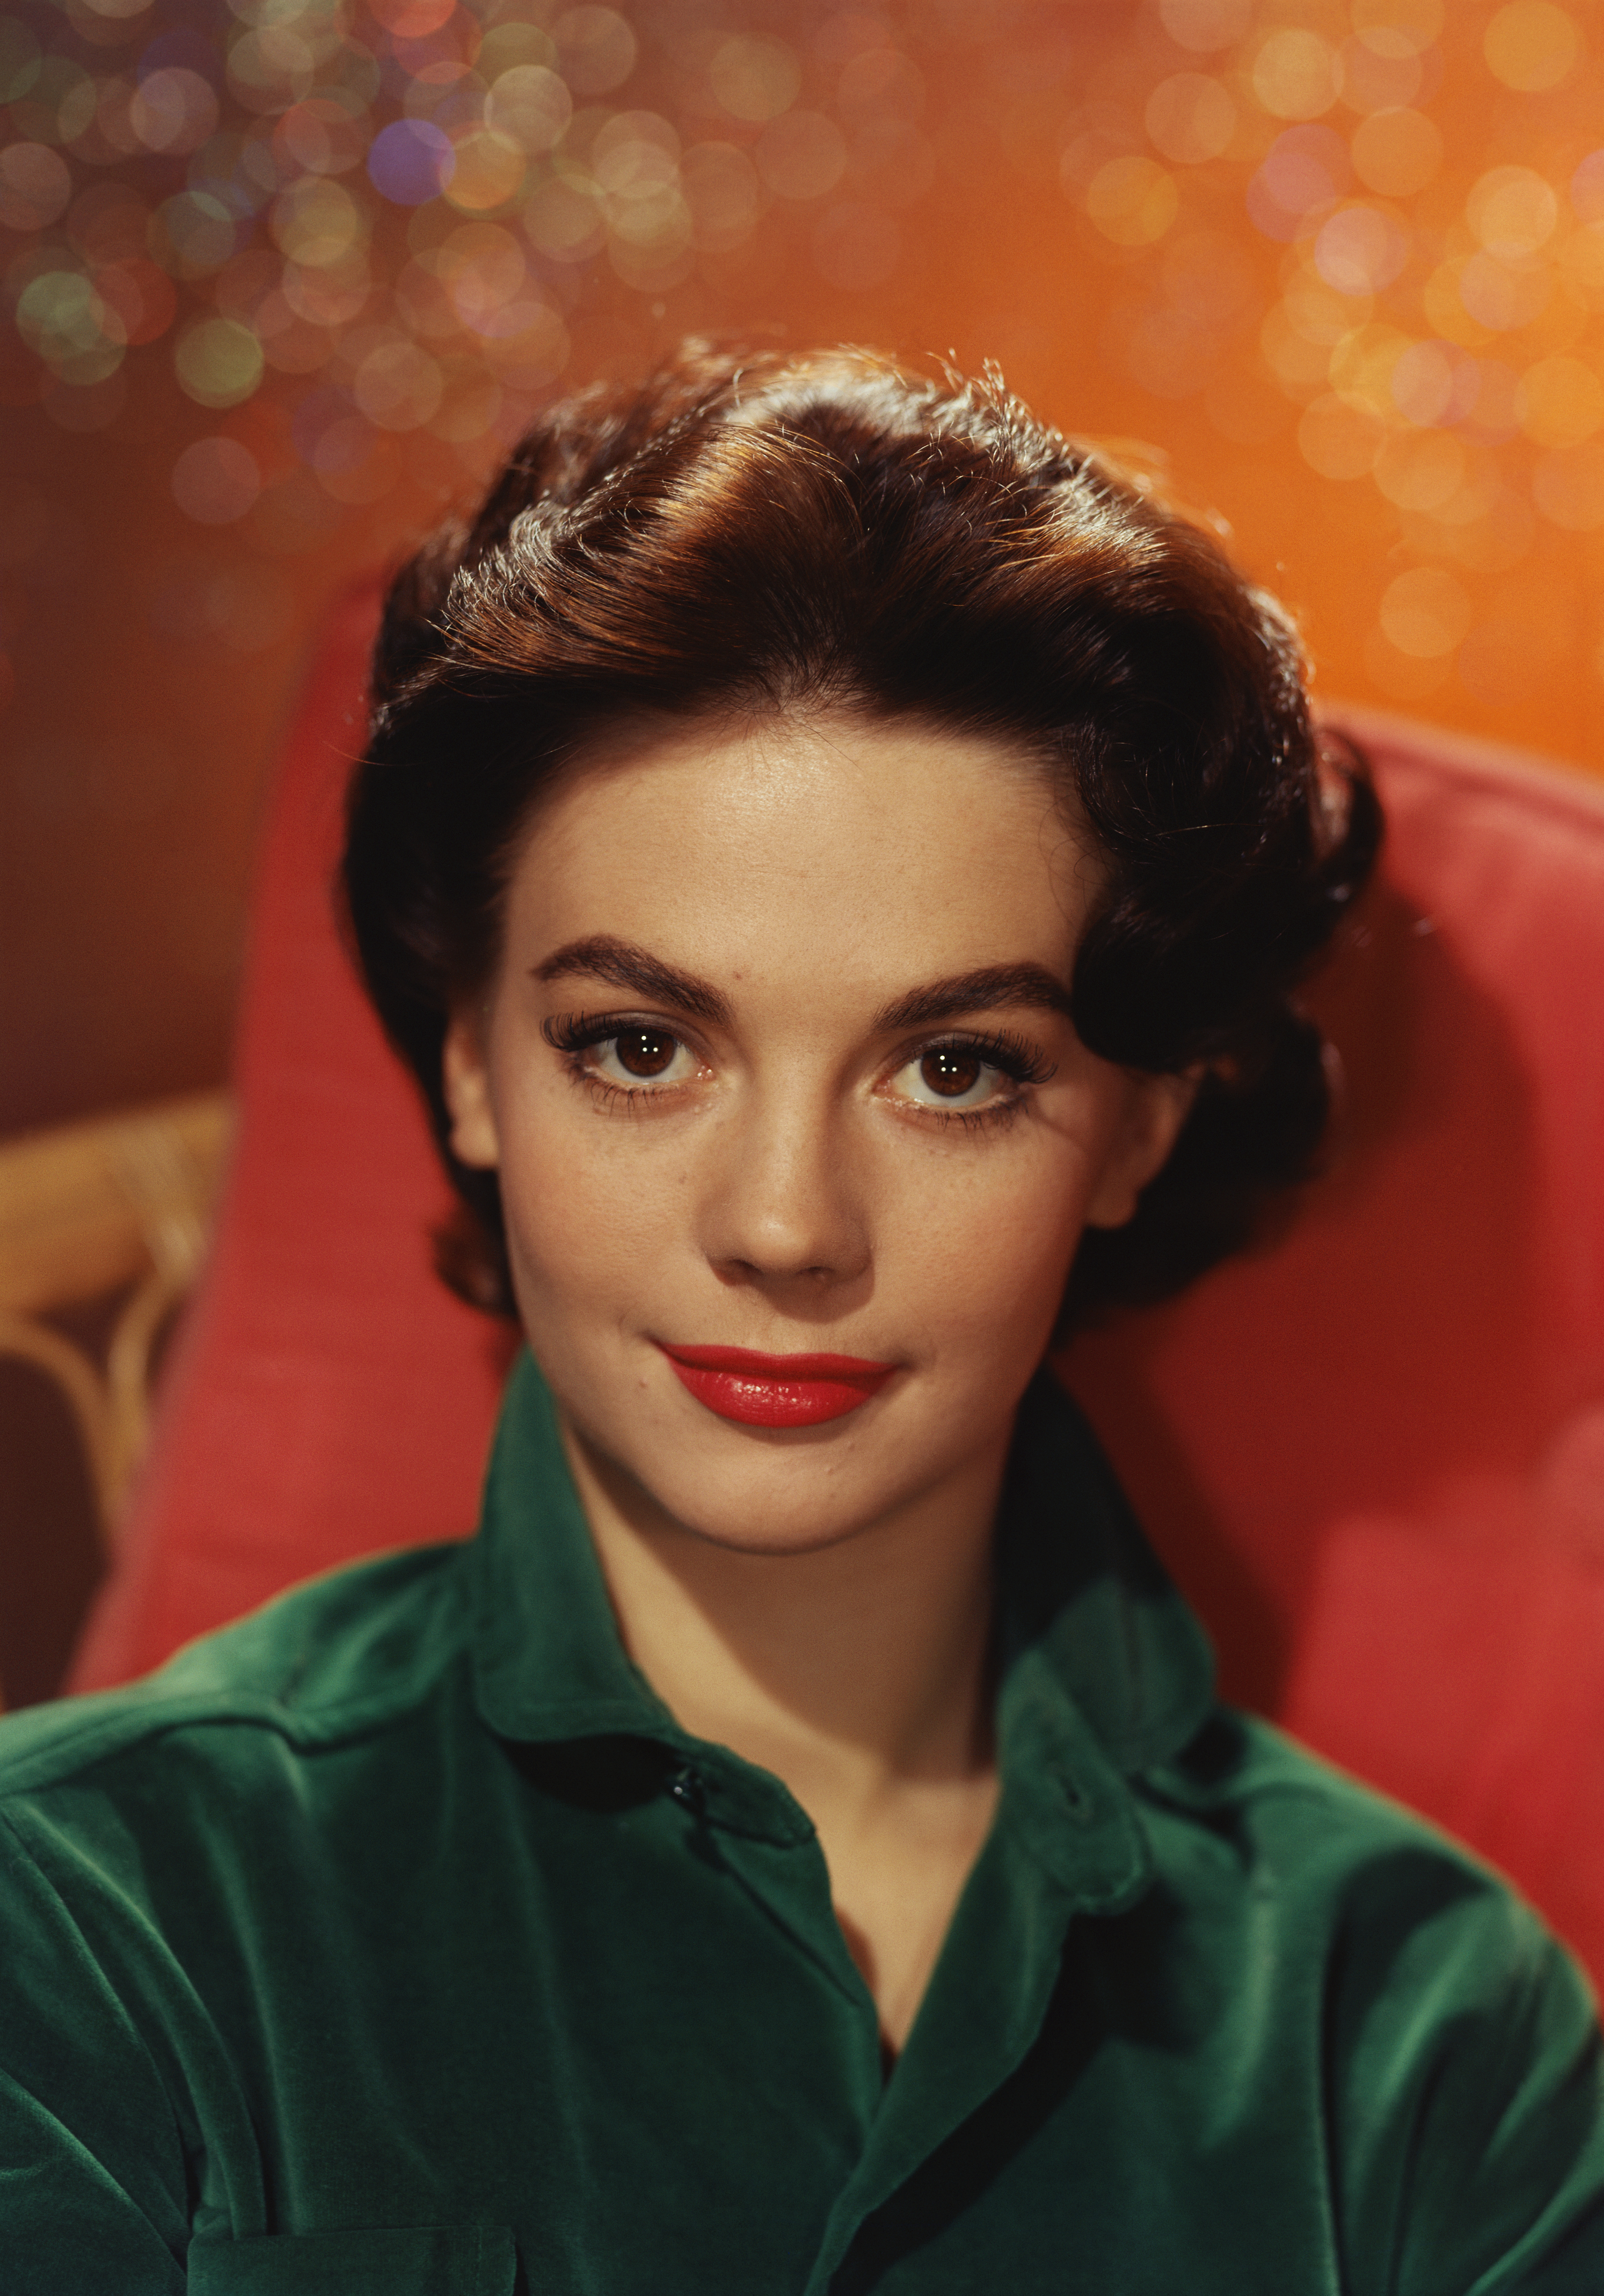 Natalie Wood circa 1955 | Source: Getty Images